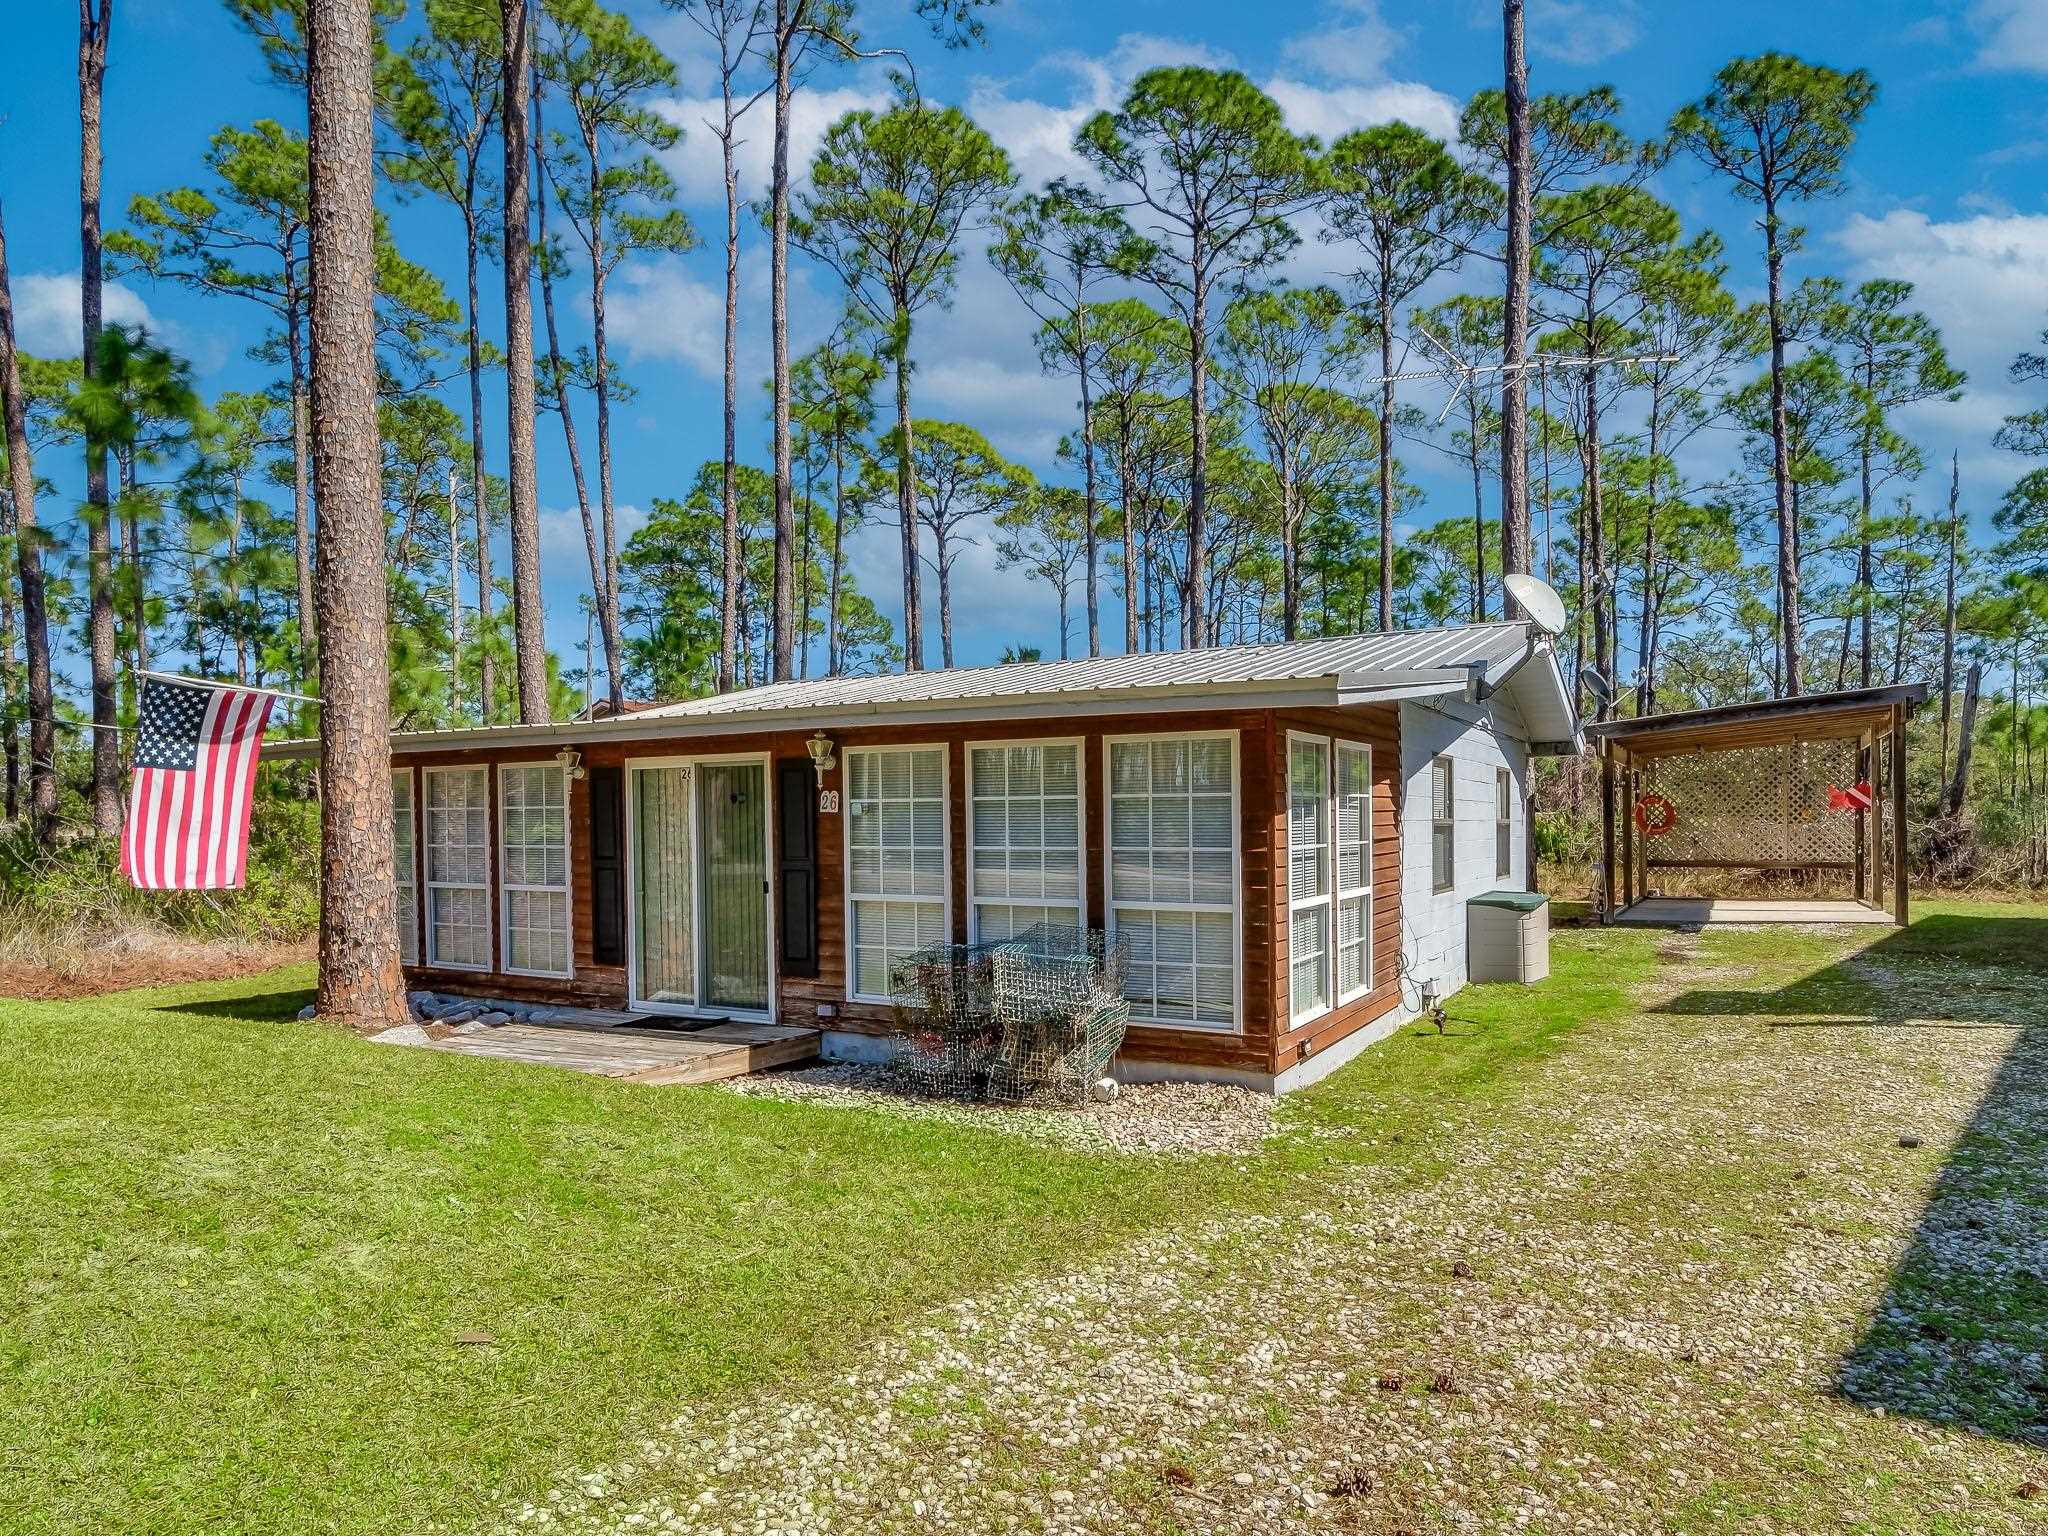 26 Lakeview Drive,ALLIGATOR POINT,Florida 32346-5117,3 Bedrooms Bedrooms,2 BathroomsBathrooms,Detached single family,26 Lakeview Drive,368882